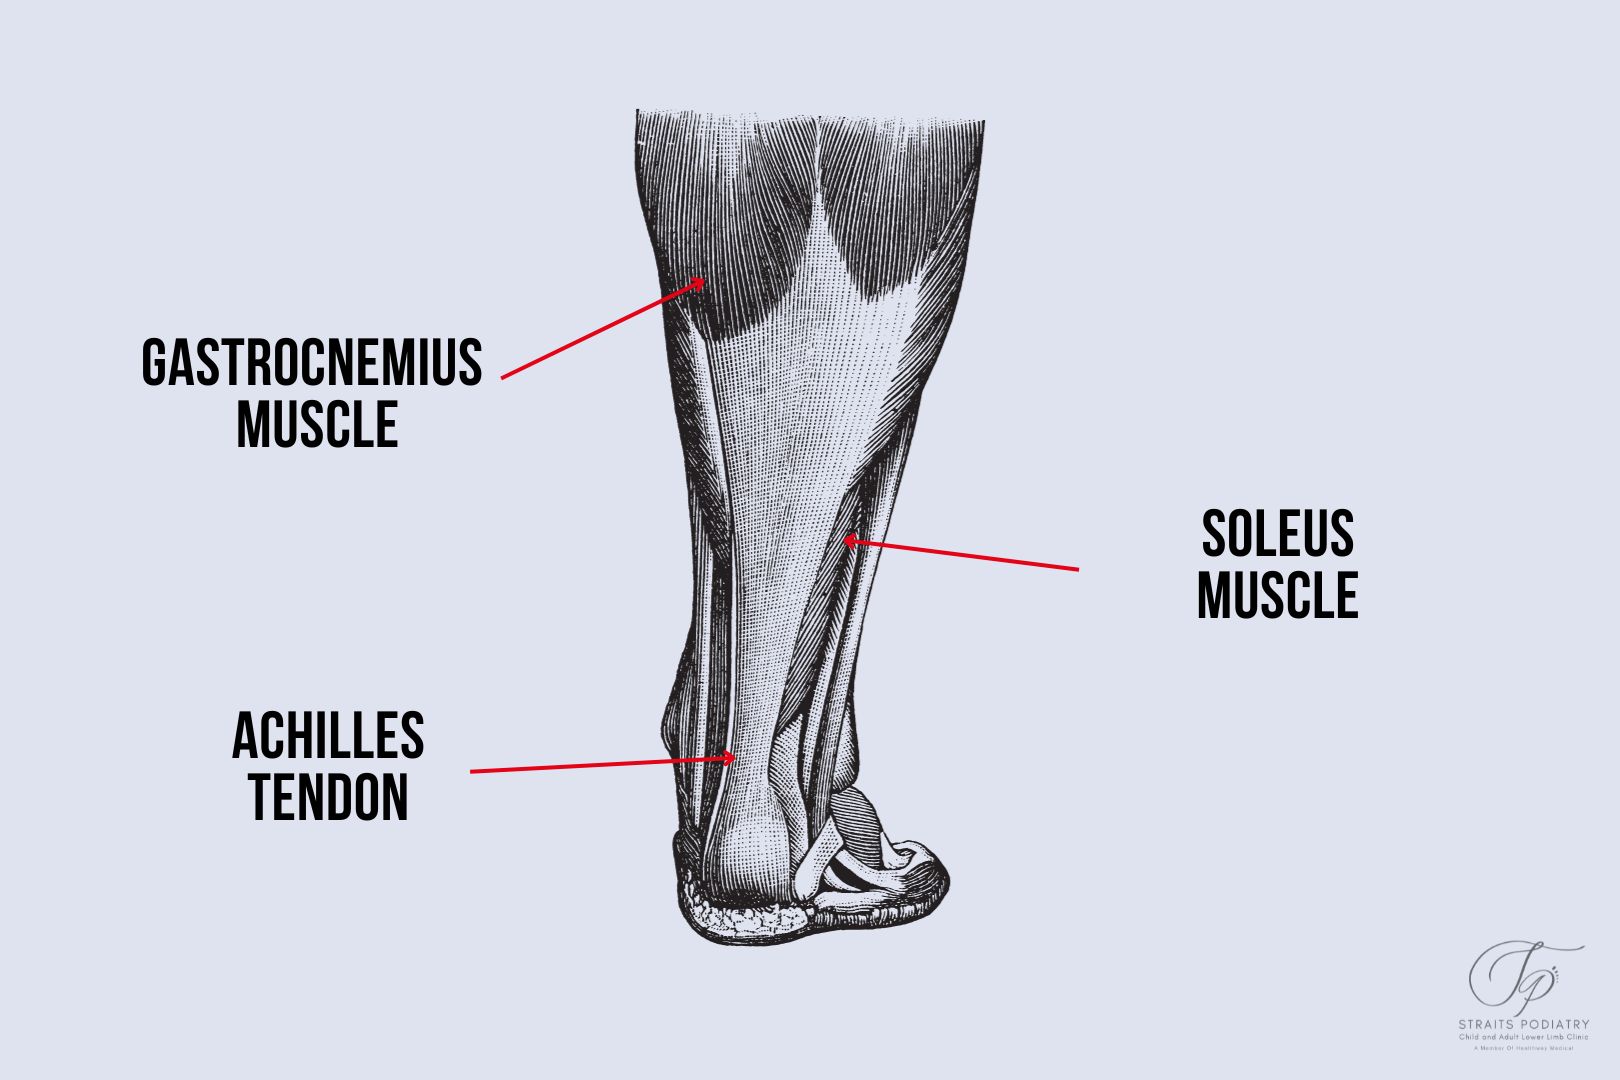 An infographic created by Straits Podiatry Singapore on the anatomy of the leg and the achilles tendon.